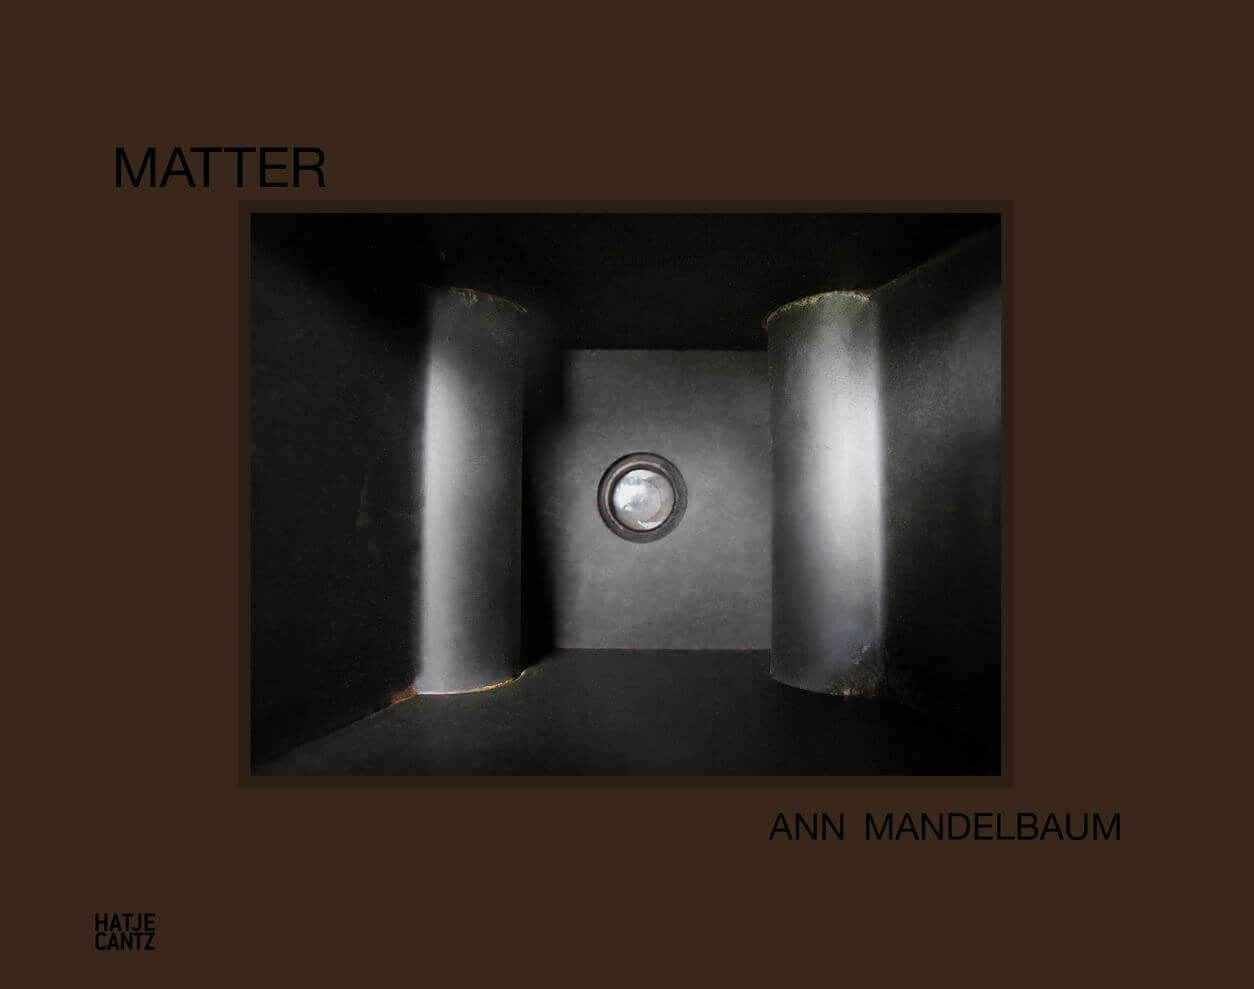 Cover image for 'Matter'. Dark brown background with abstract, metalic shape in the centre. Title printed in black sans serif font, top left